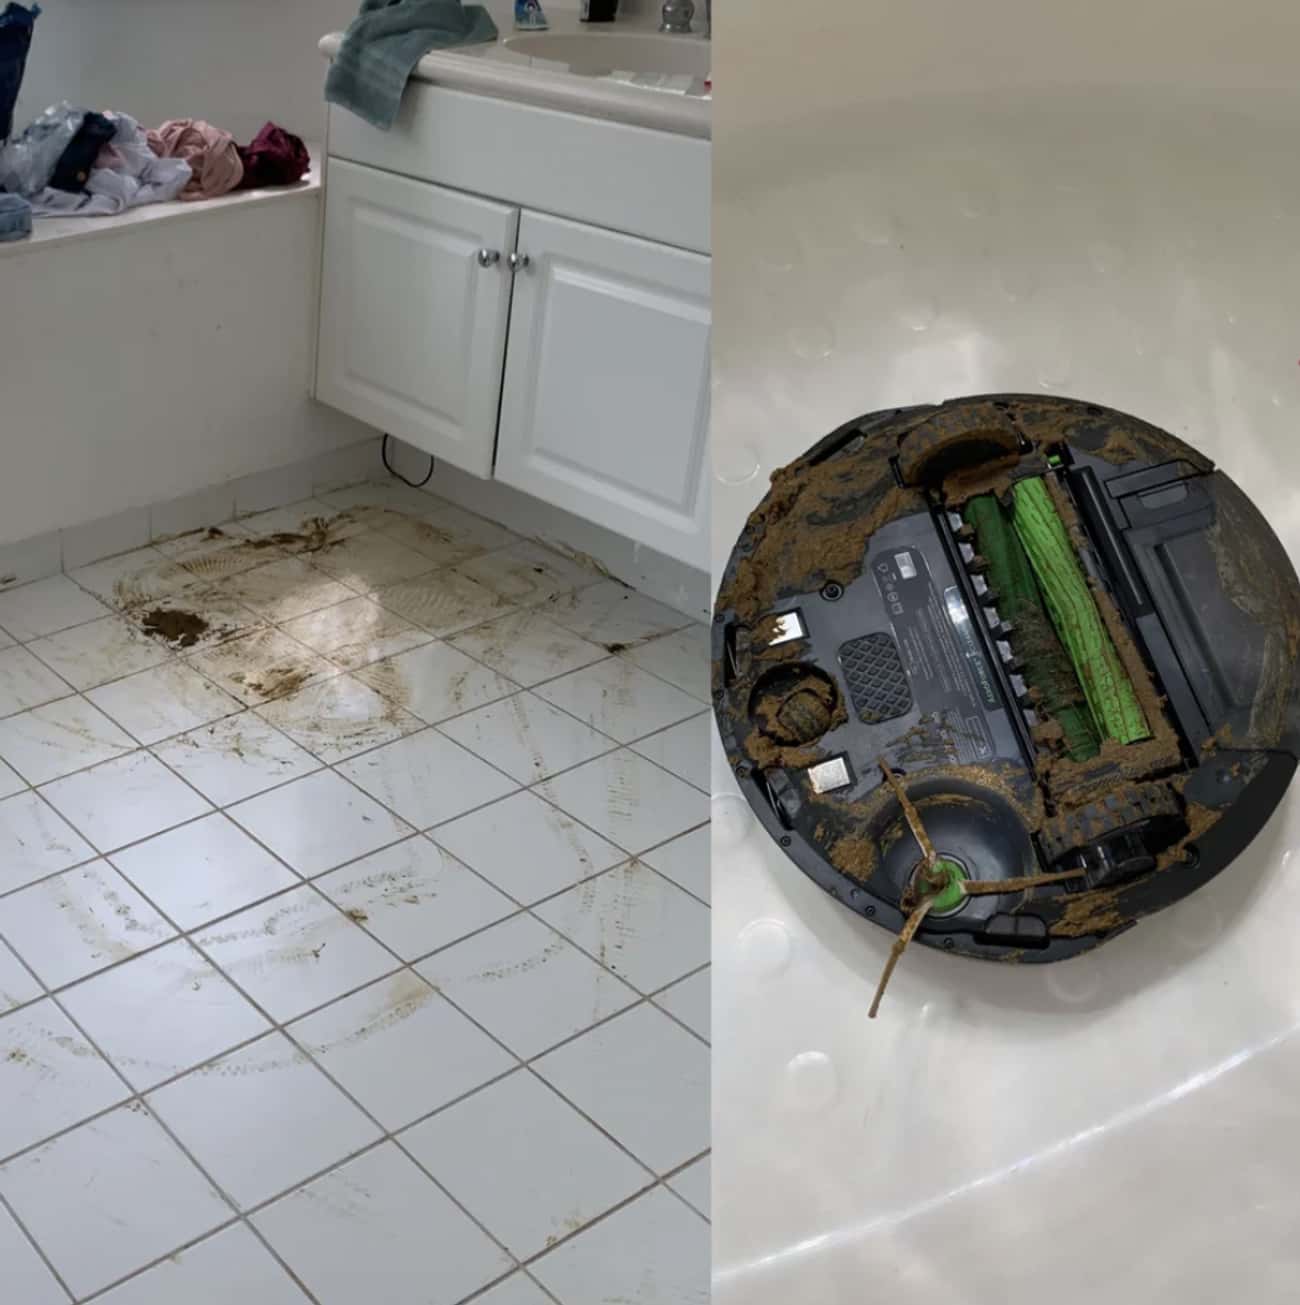 "My Brand New Roomba Ran Over My Puppy's Poop And Proceeded To 'Clean' The Rest Of My Home"